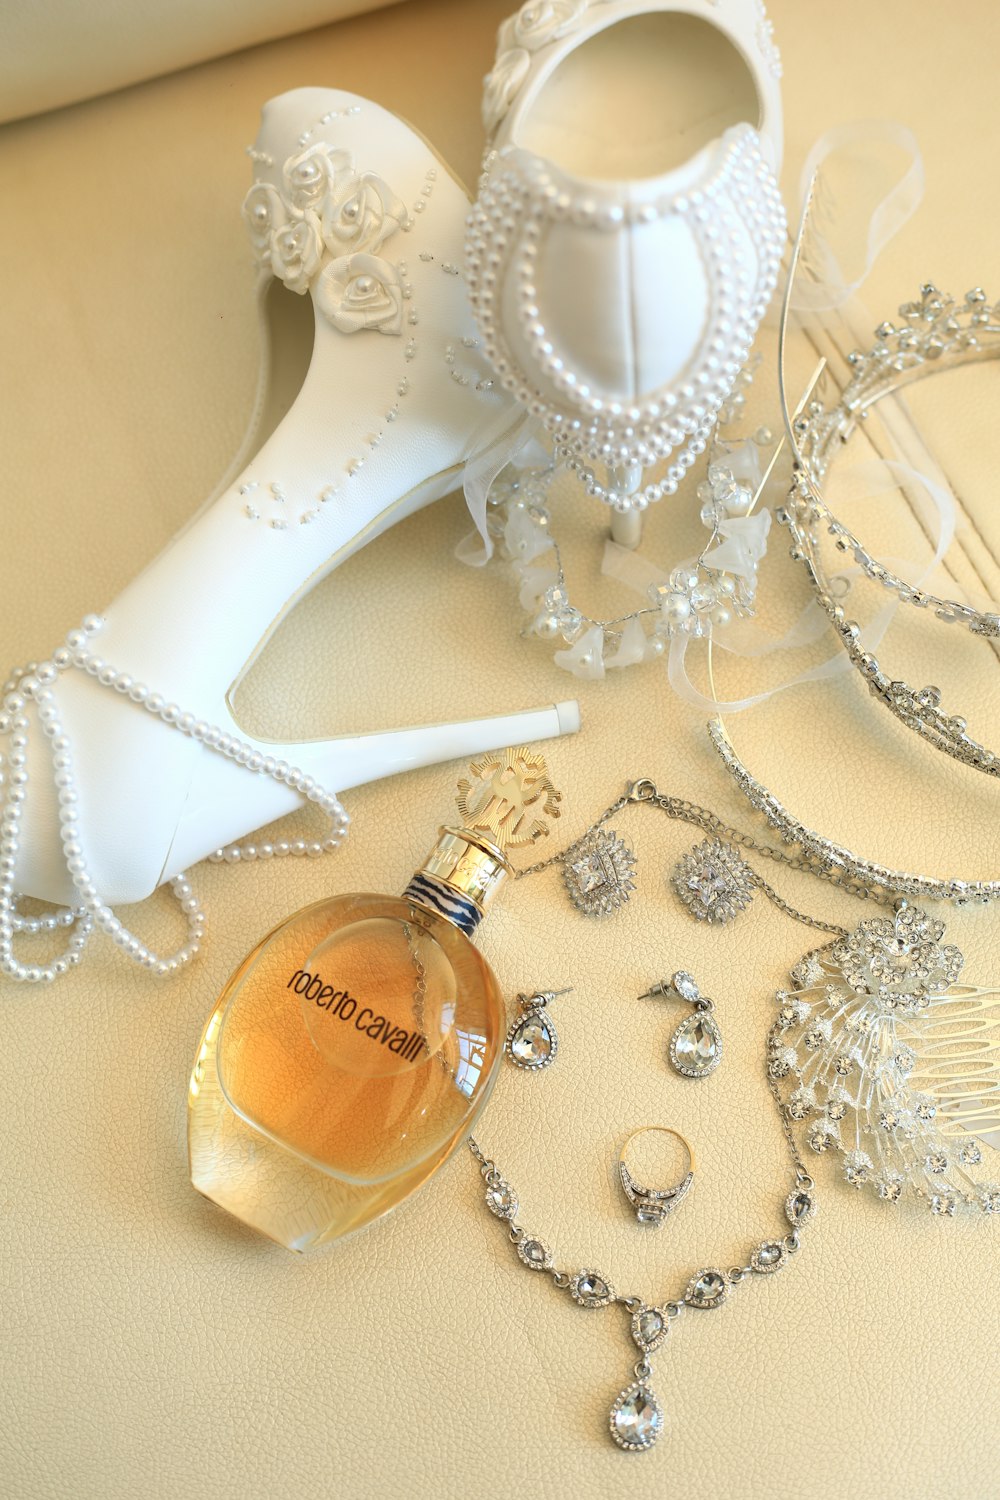 gold perfume bottle beside white lace